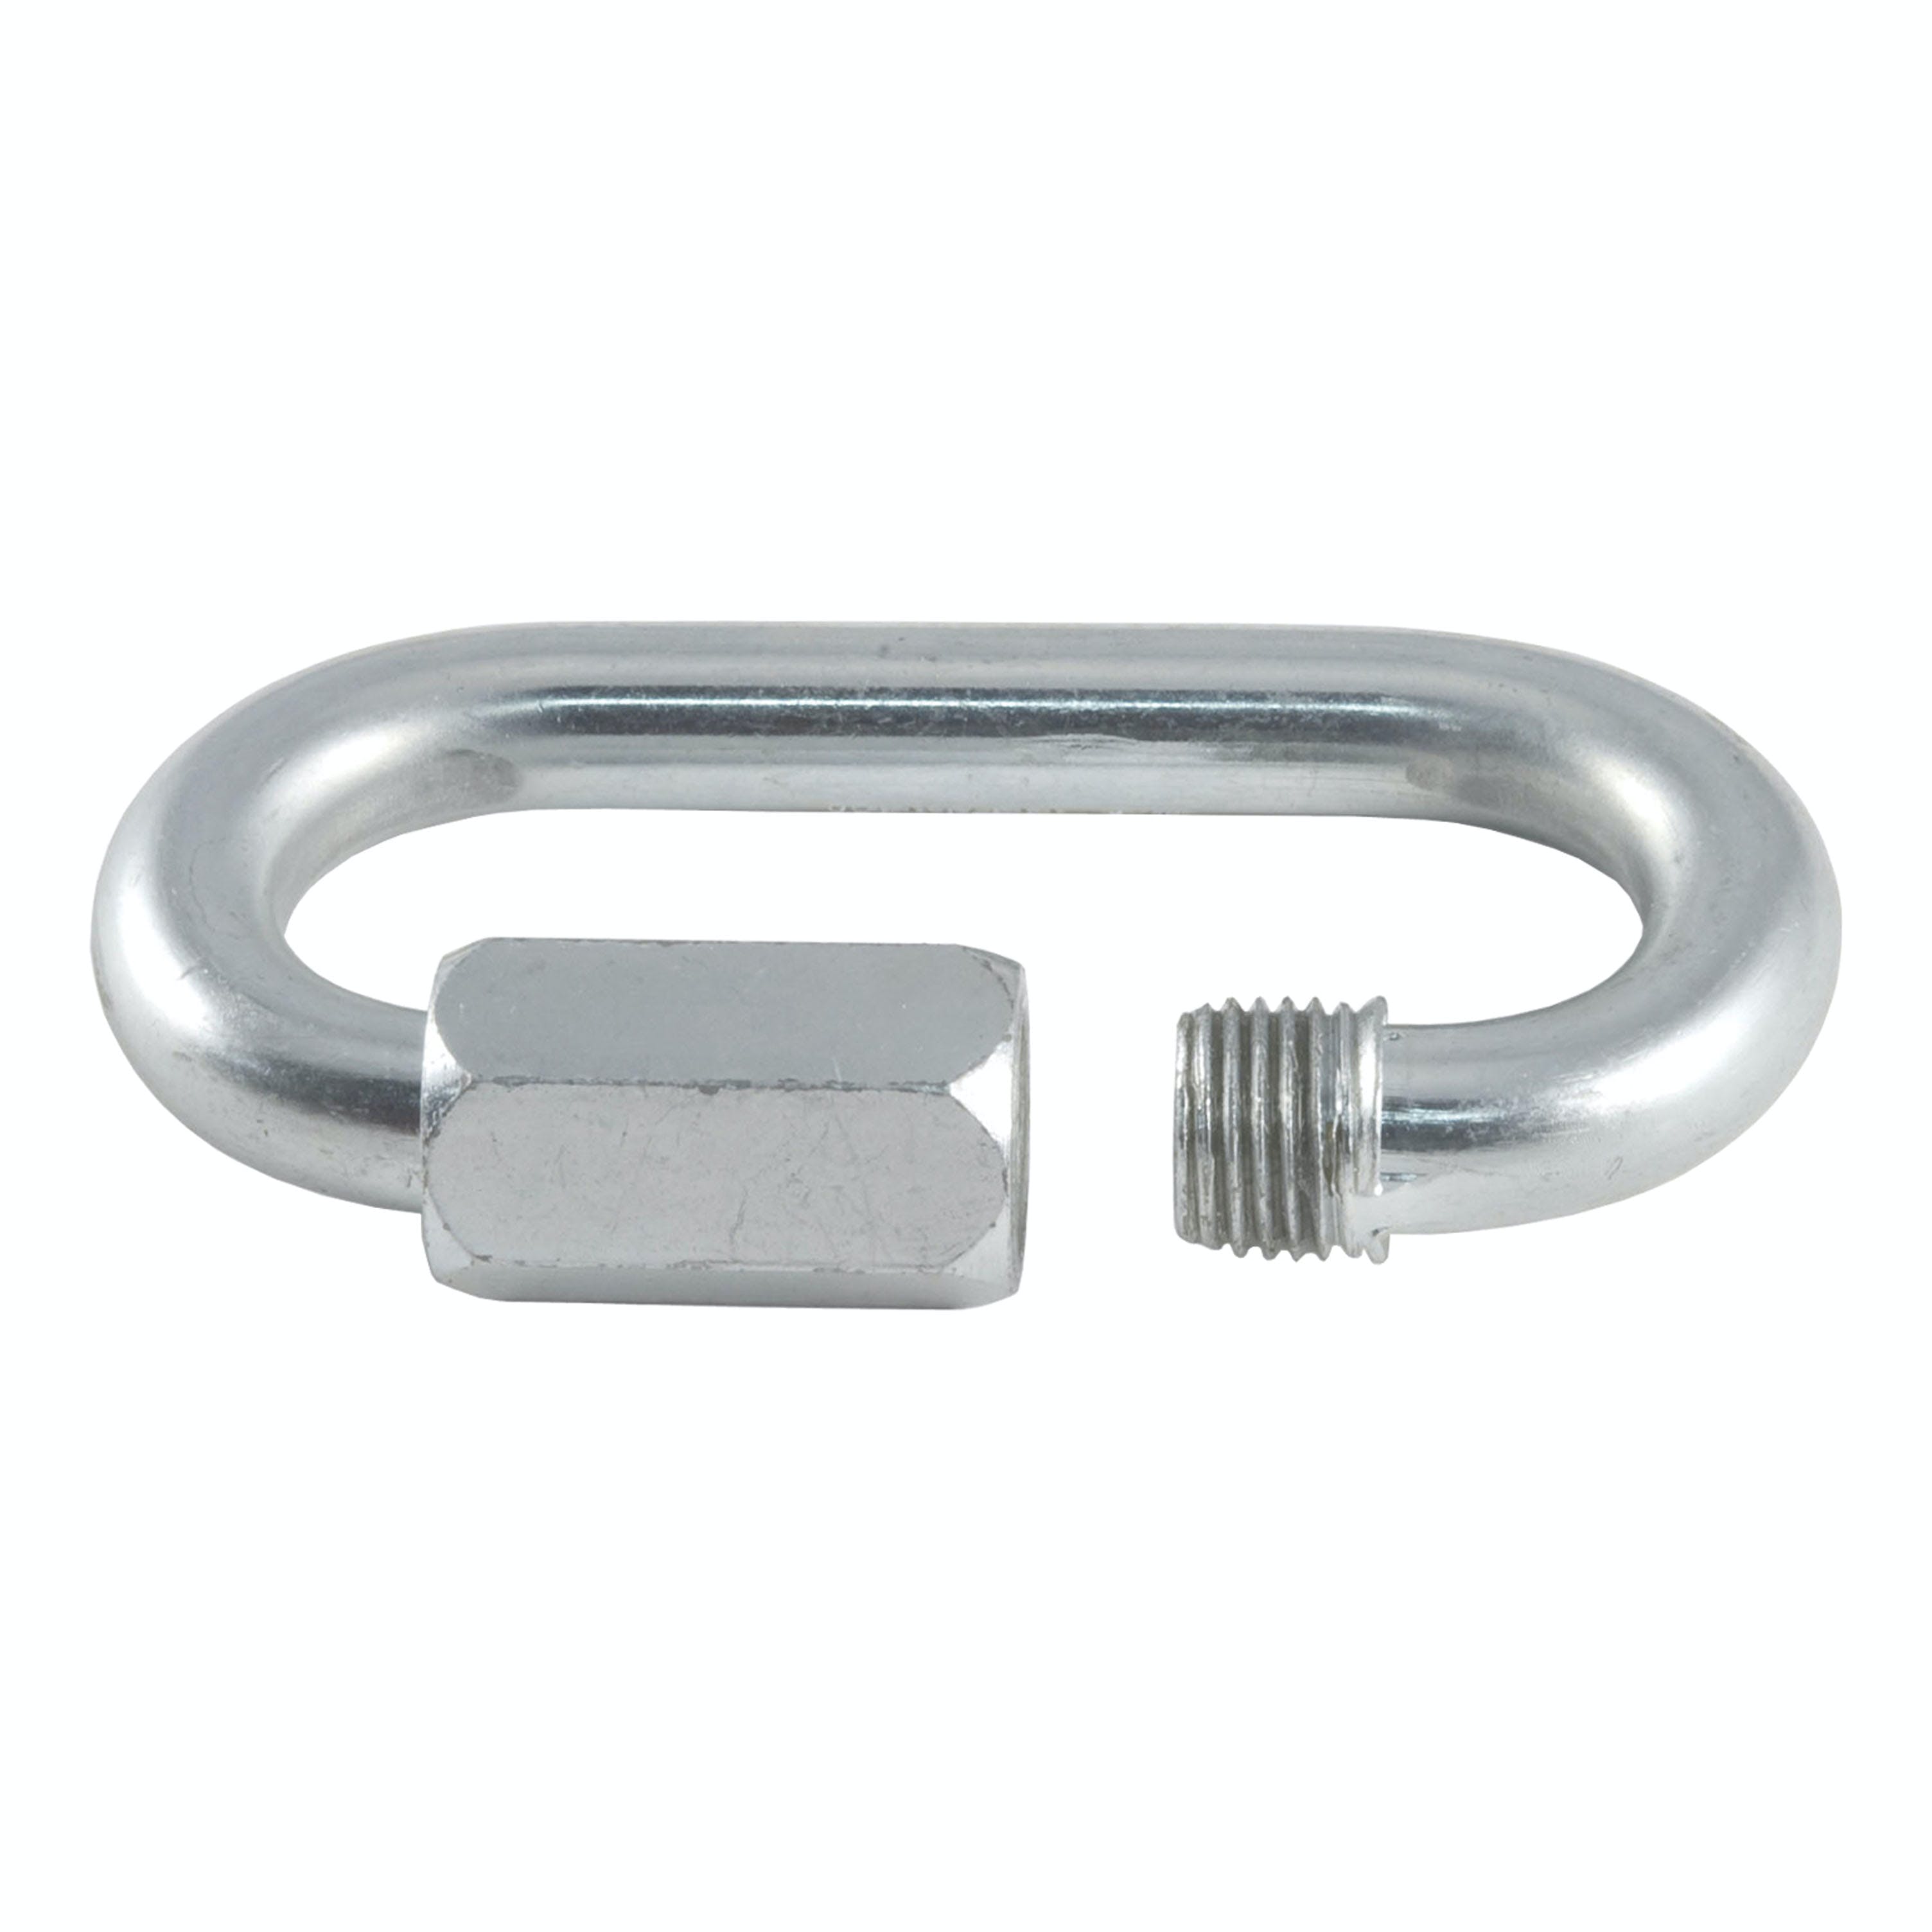 CURT 82933 3/8 Quick Link (11,000 lbs. Breaking Strength, Packaged)